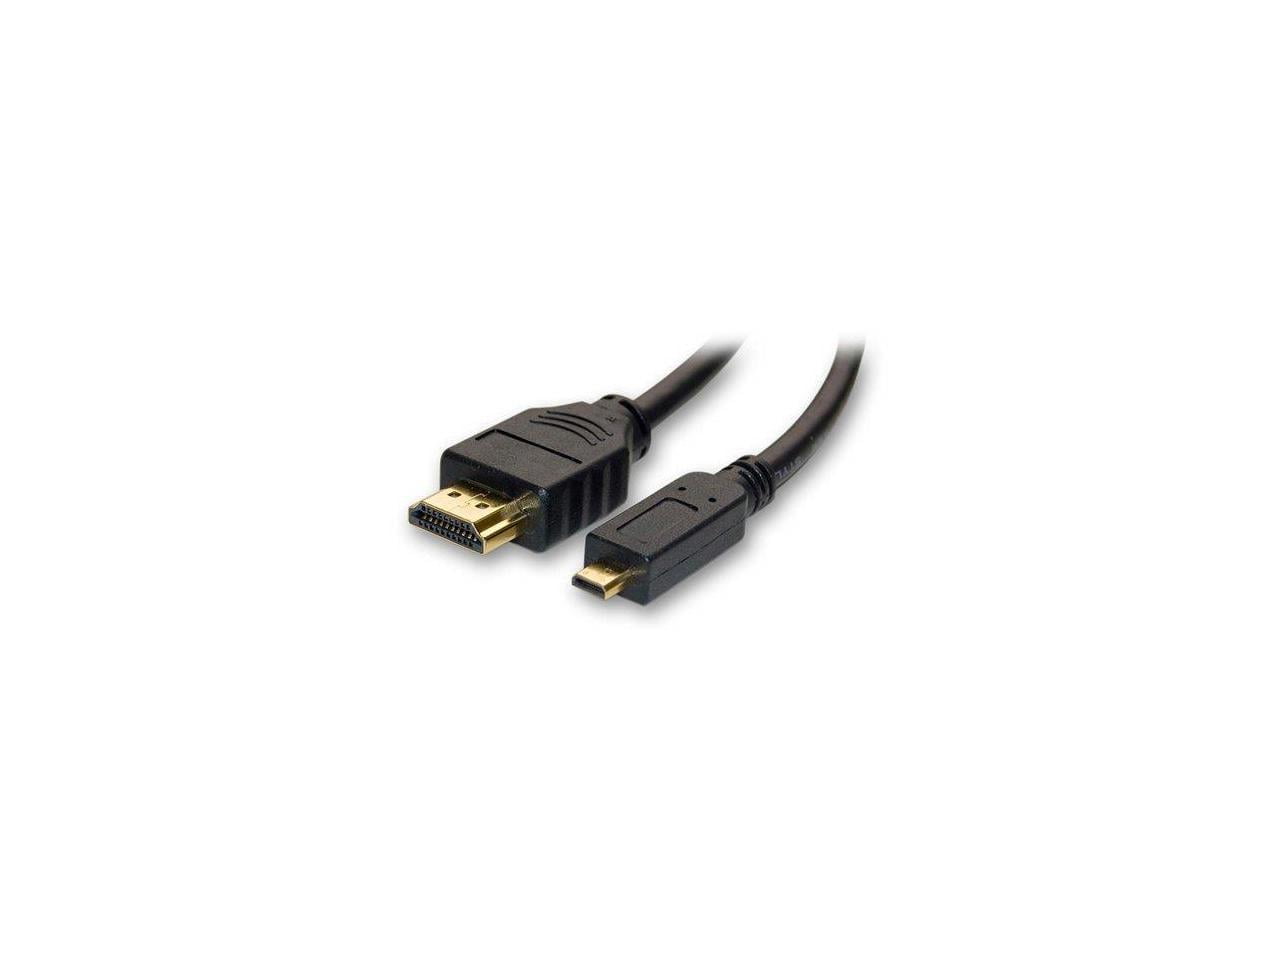 4XEM Mini HDMI To HDMI Adapter Cable, 6